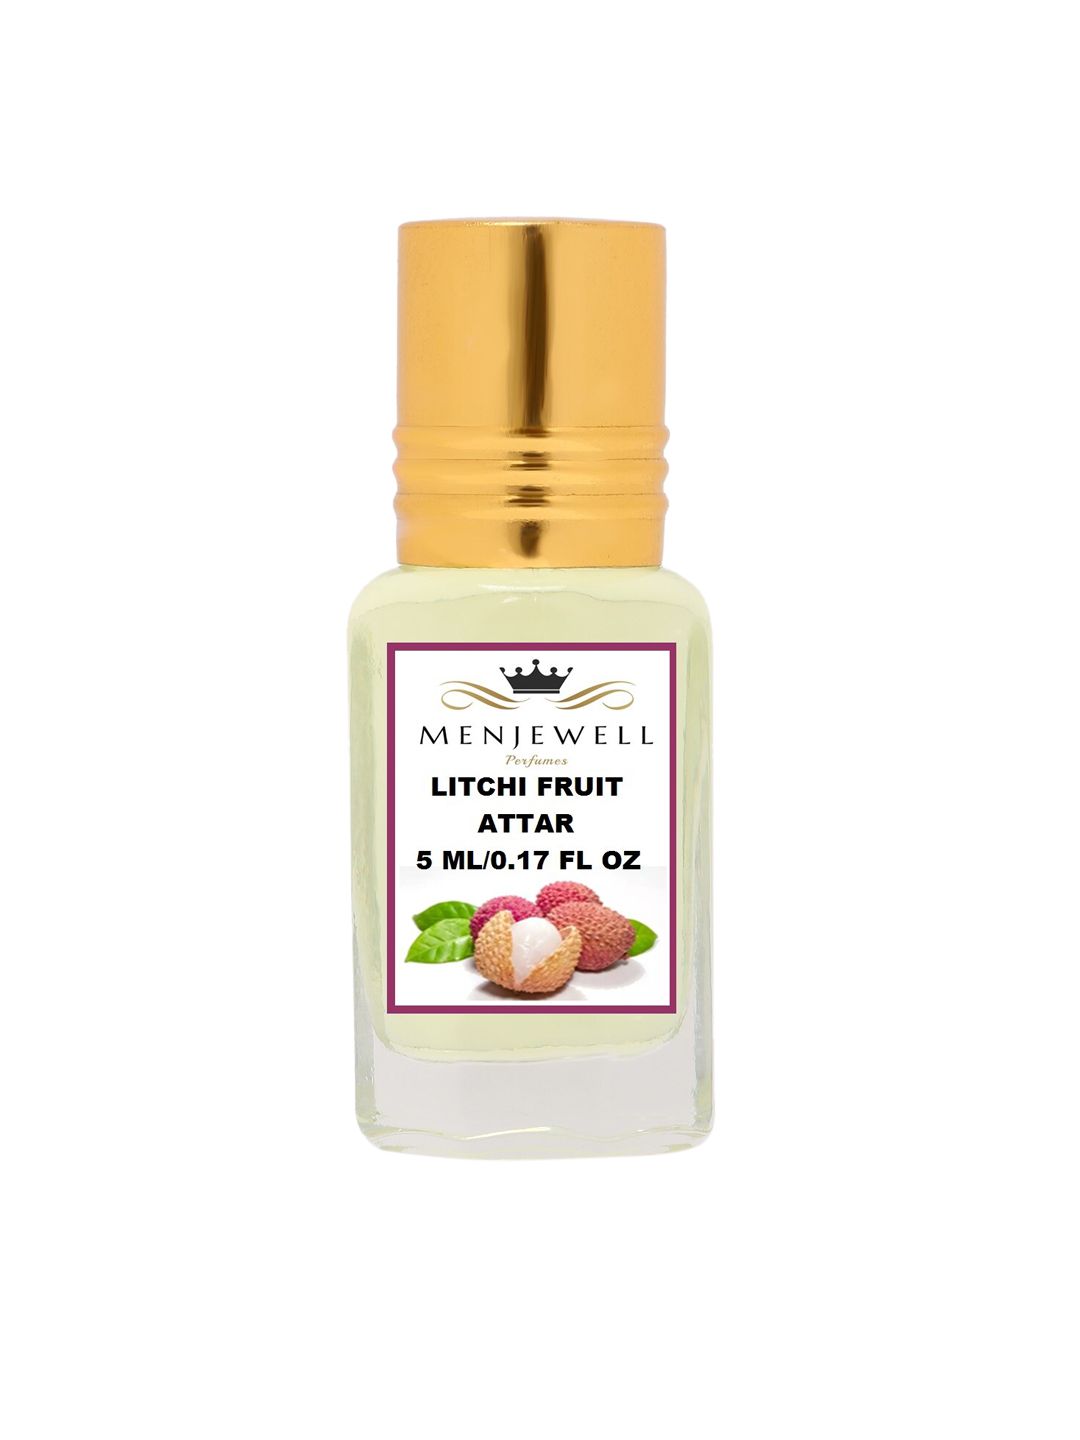 Menjewell Litchi Fruit Natural Attar 5ml Price in India